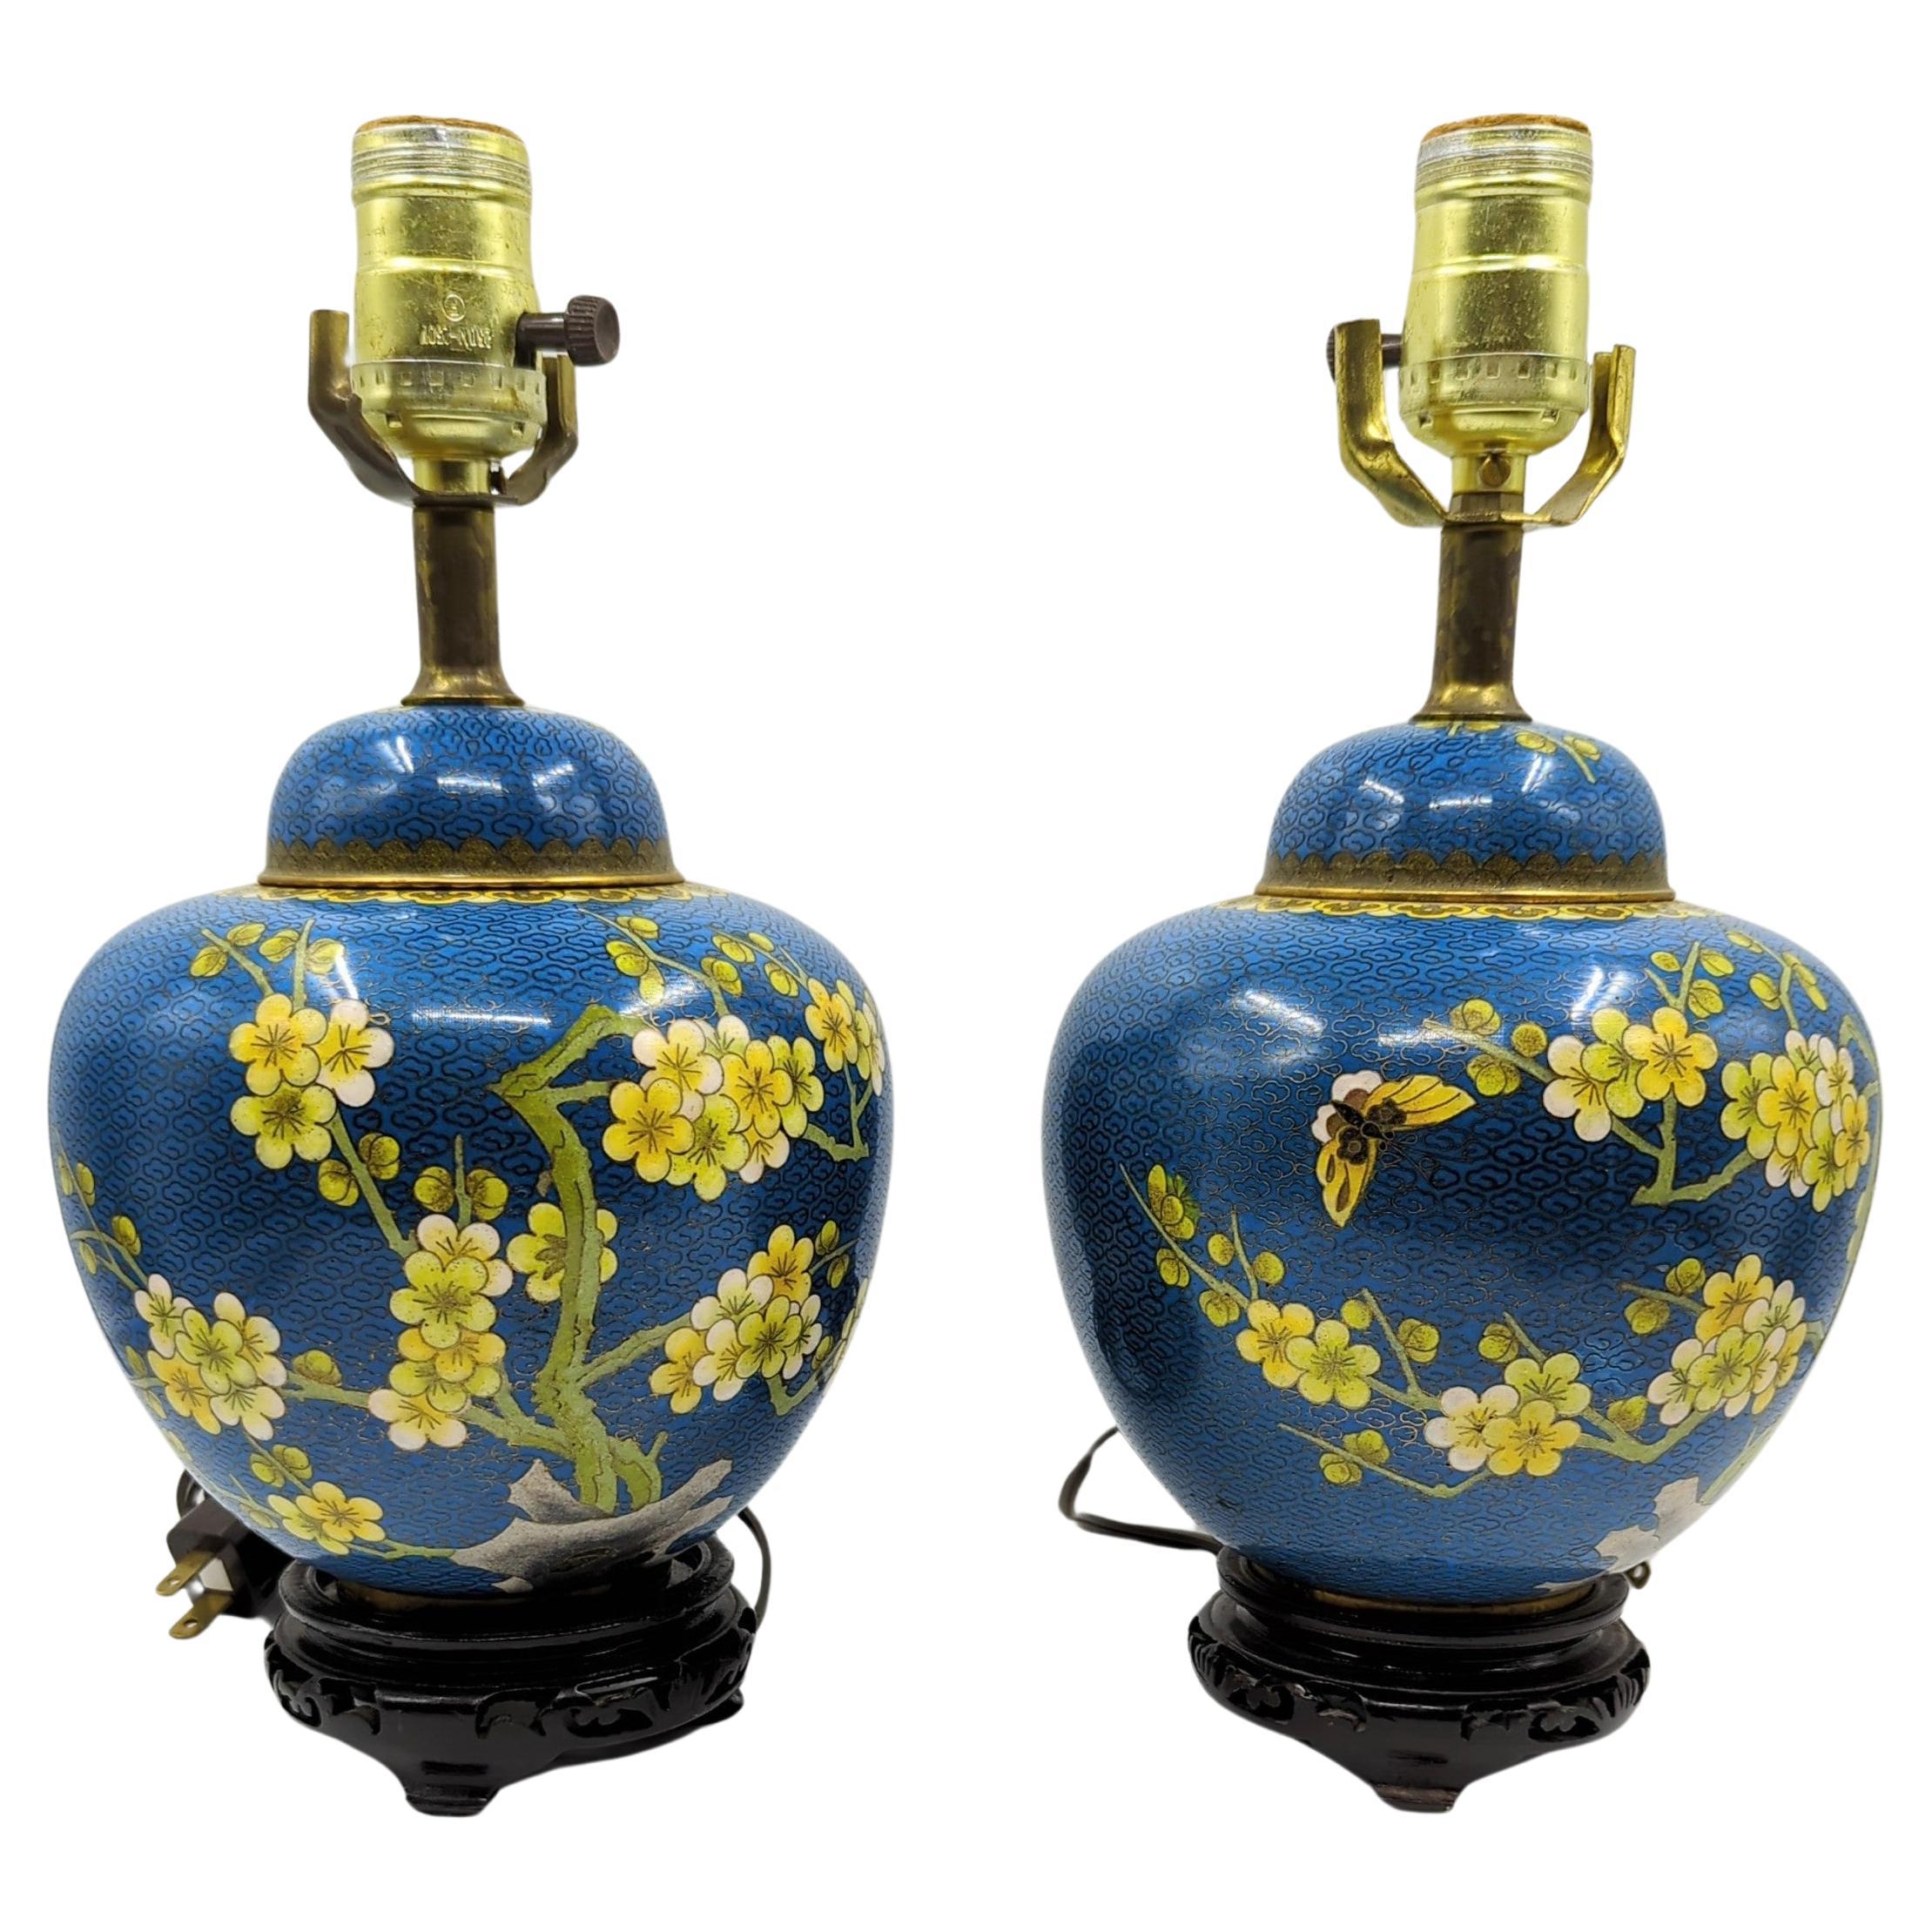 Pair Antique 19c Chinese Gilt Cloisonne Covered Prunus Ginger Jar Table Lamps For Sale 9